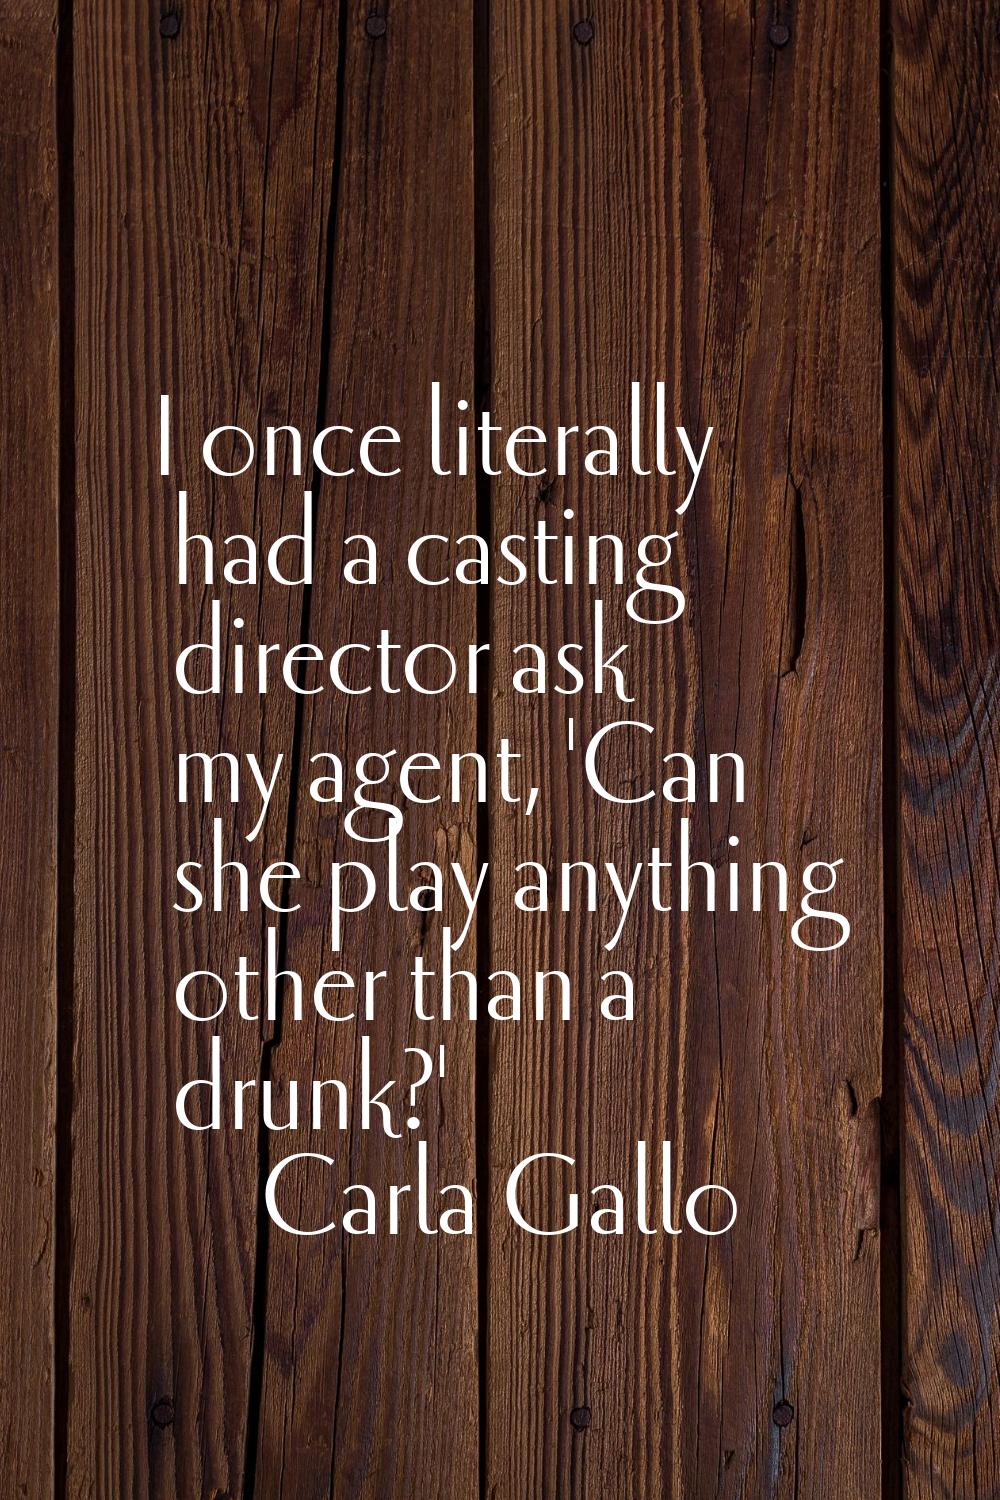 I once literally had a casting director ask my agent, 'Can she play anything other than a drunk?'